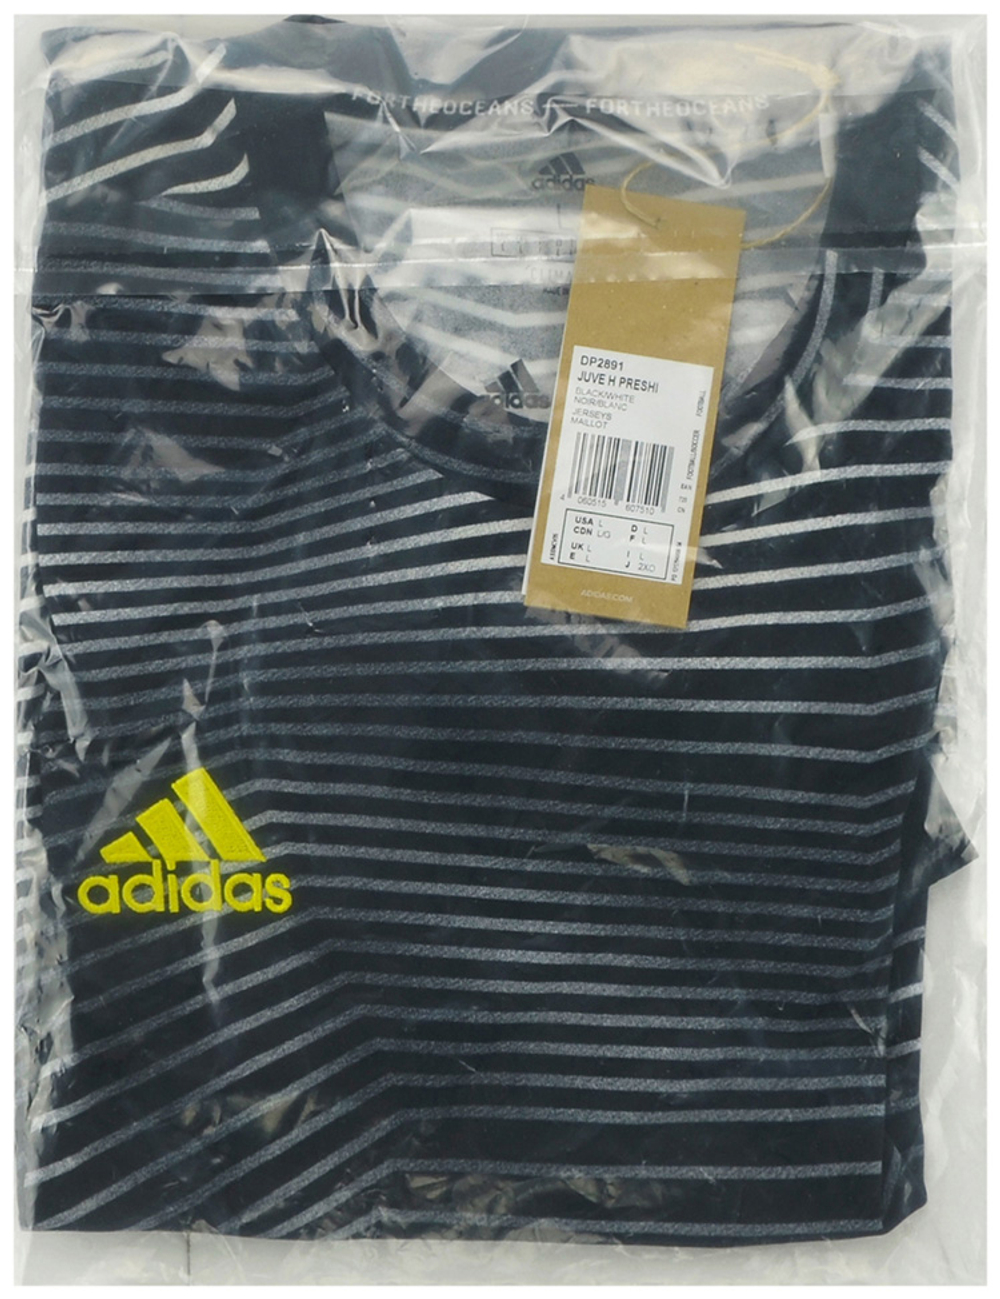 2018-19 Juventus Adidas Pre-Match Training Shirt *BNIB*-Juventus Featured Products View All Clearance Training Adidas Clearance Permanent Price Drops Training Shirts New Training Dazzling Designs